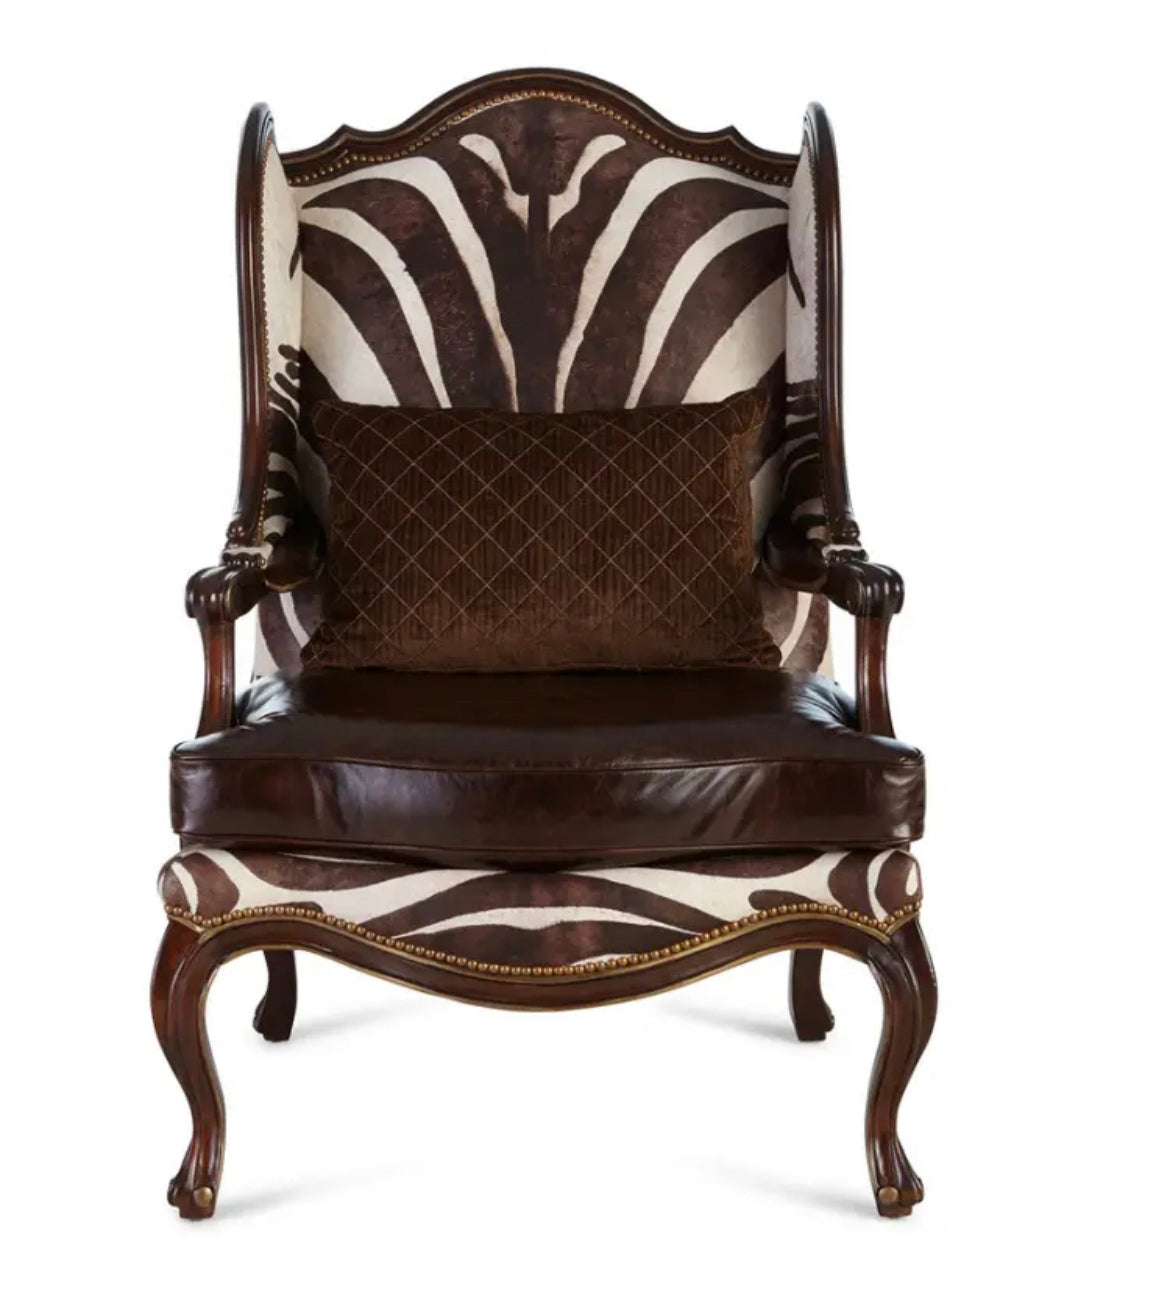 Arm Chair Italian High Quality Zebra Print Living Room Accent Upholstered Leather Chairs